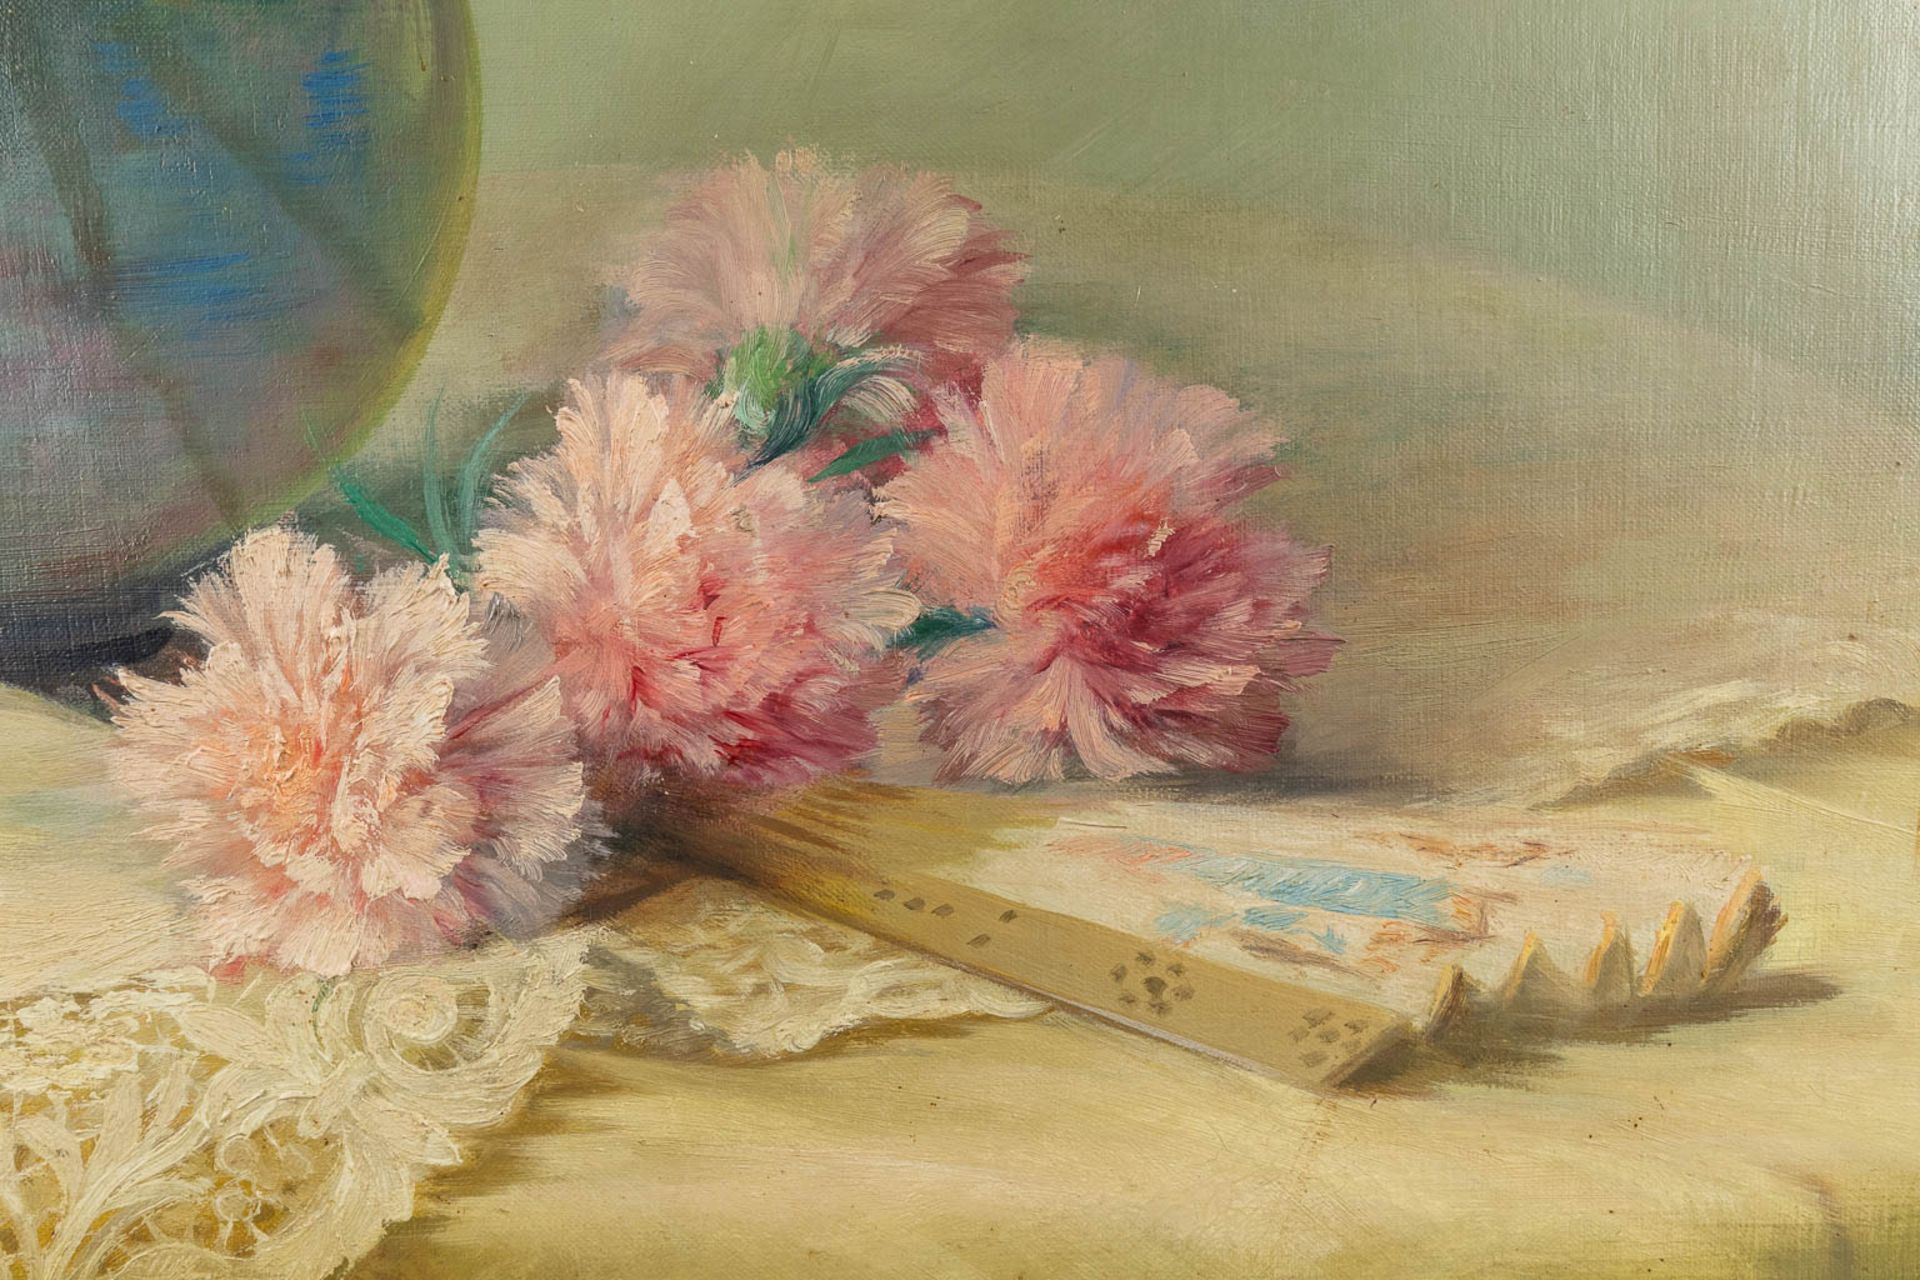 Julien STAPPERS (1875-1960) 'Flowers and porcelain' oil on canvas. (W:100 x H:80 cm) - Image 6 of 8